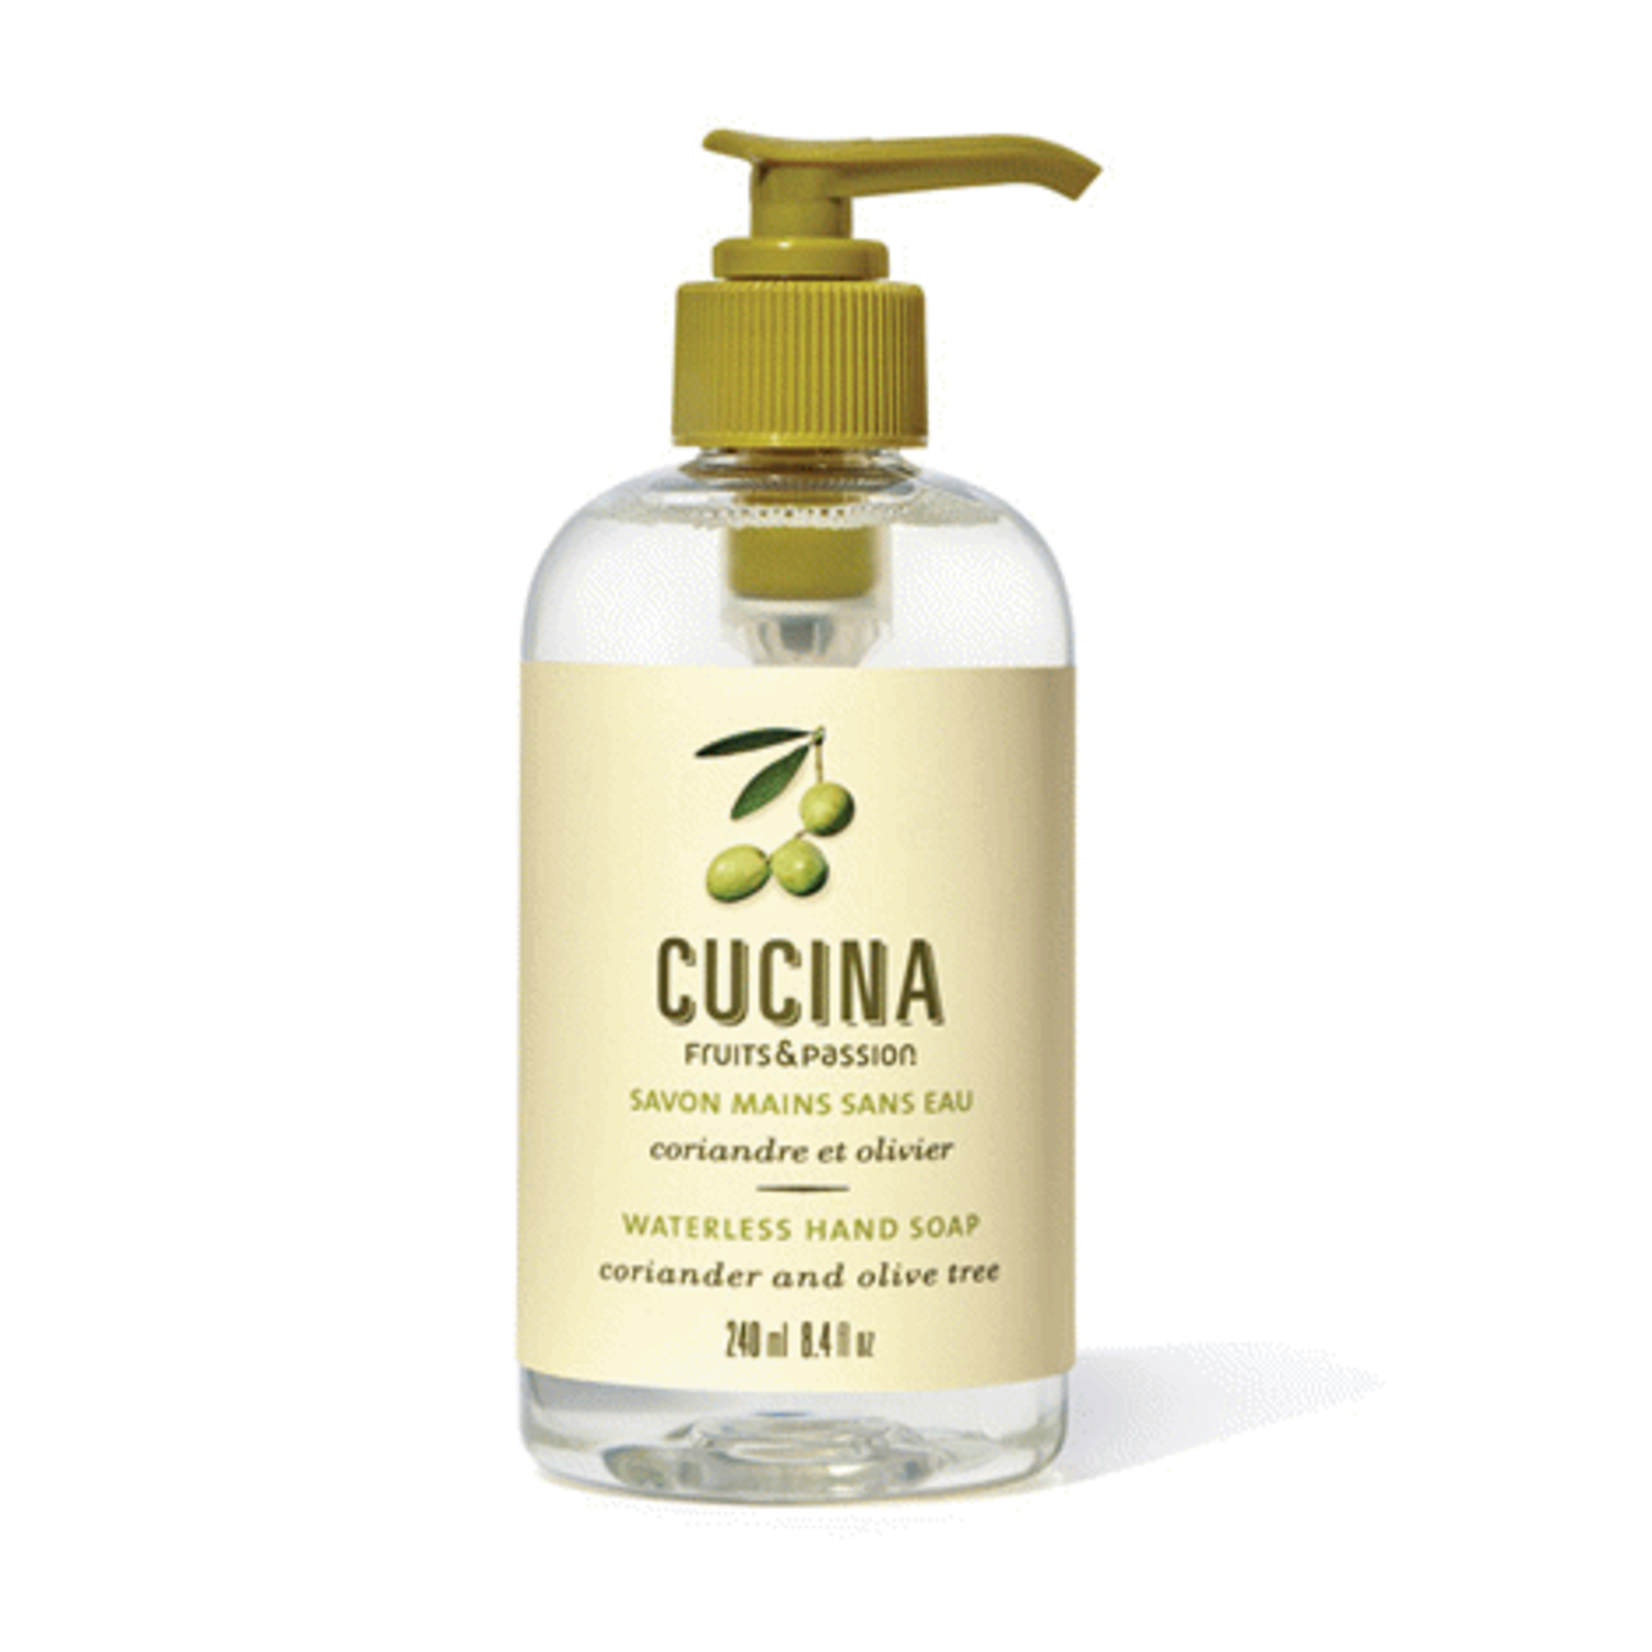 Cucina Waterless Hand Soap - Coriander and Olive Tree